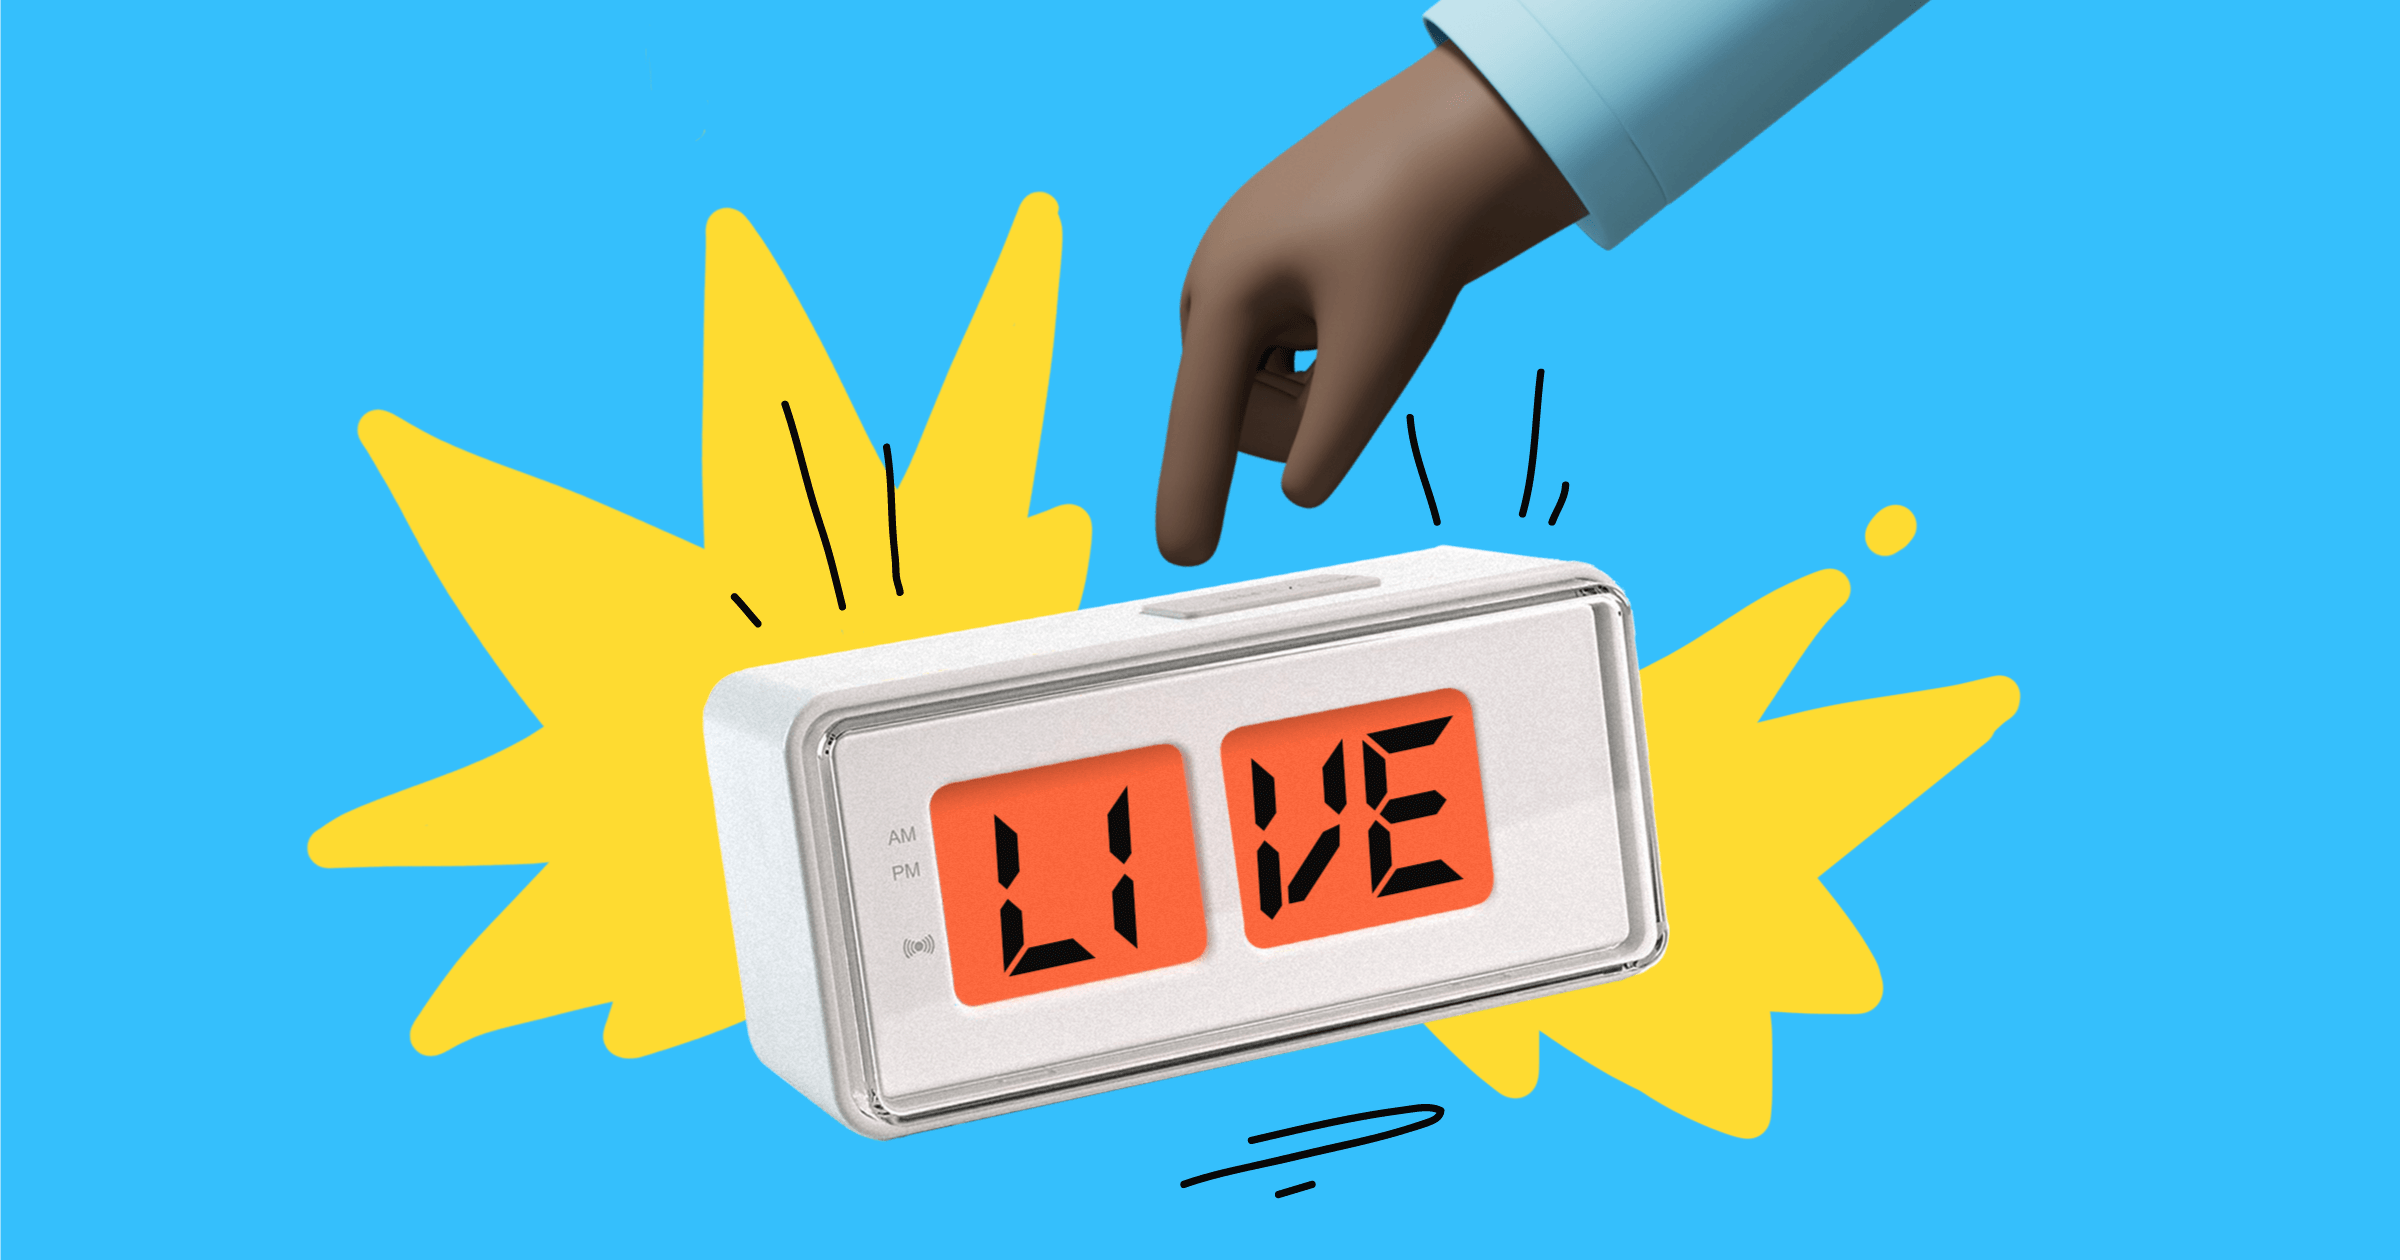 How to find the perfect time for your live stream show